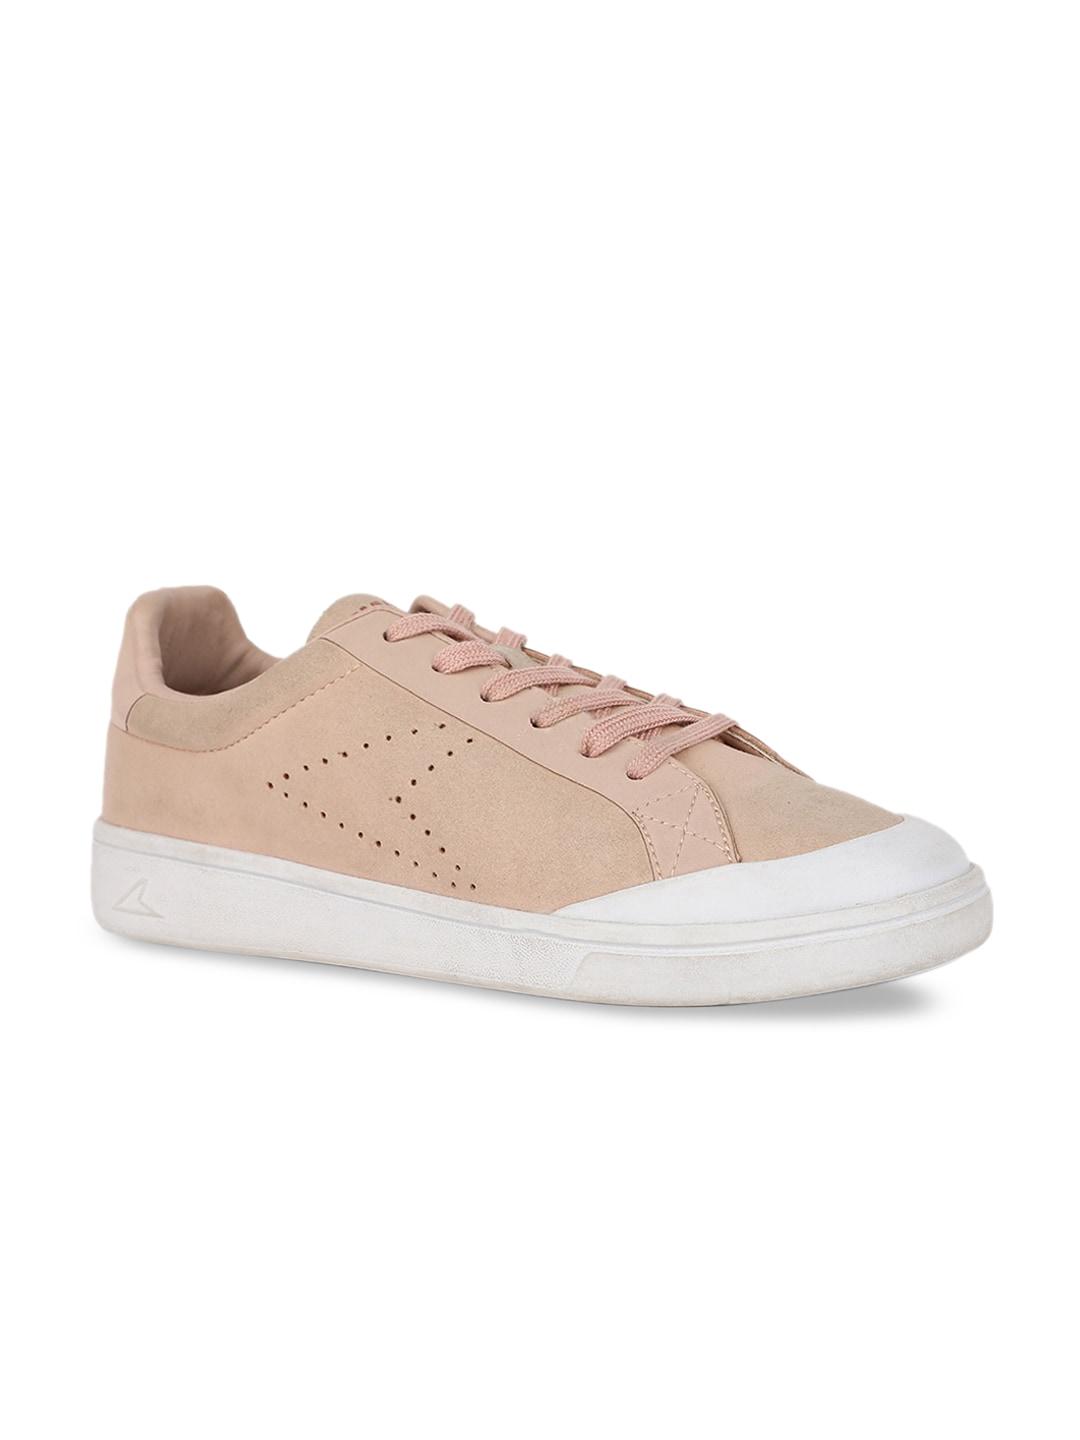 power women peach-coloured solid sneakers